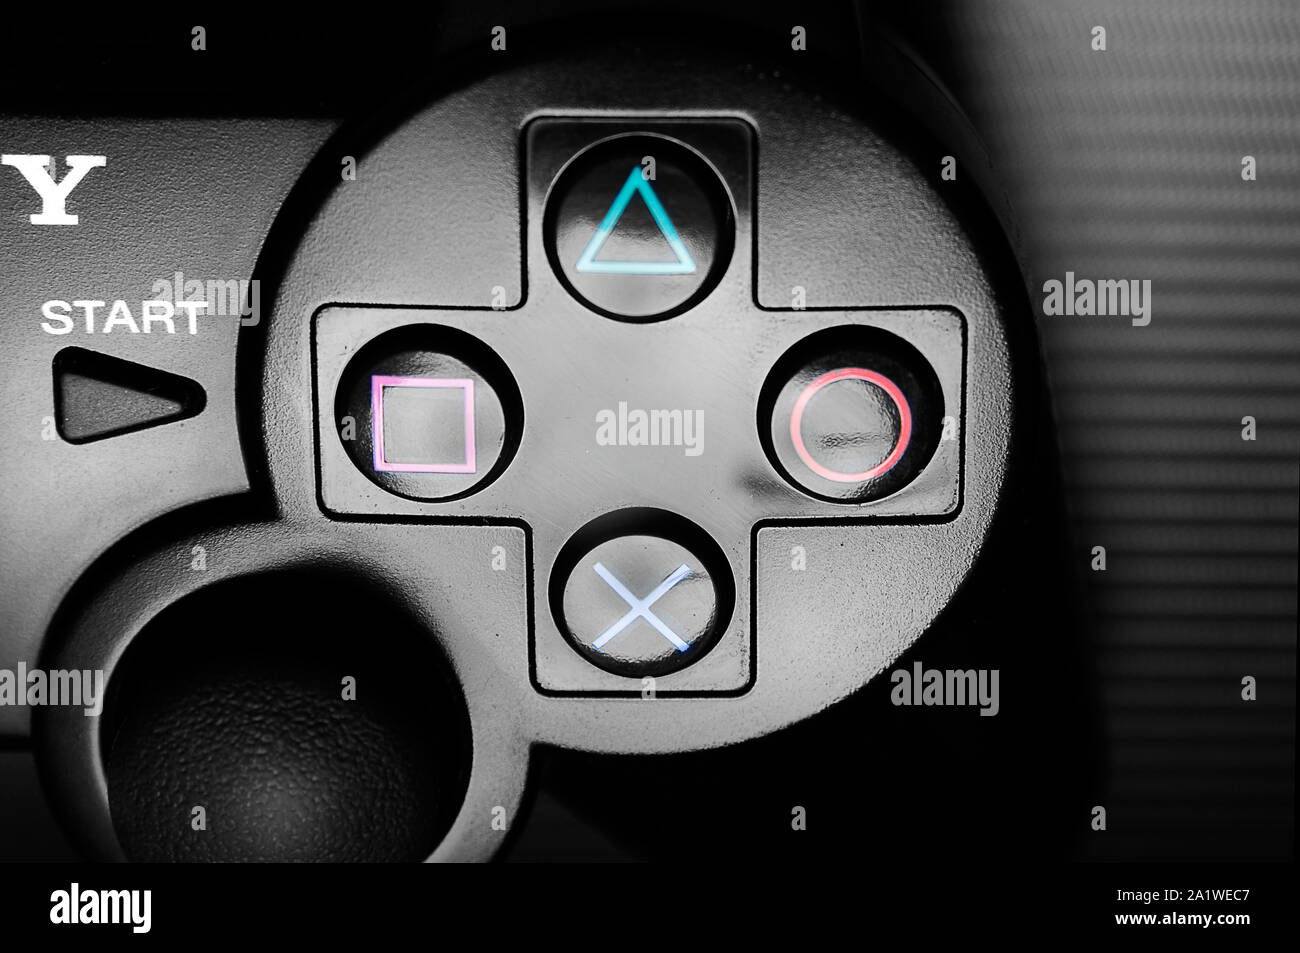 playstation 3 buttons